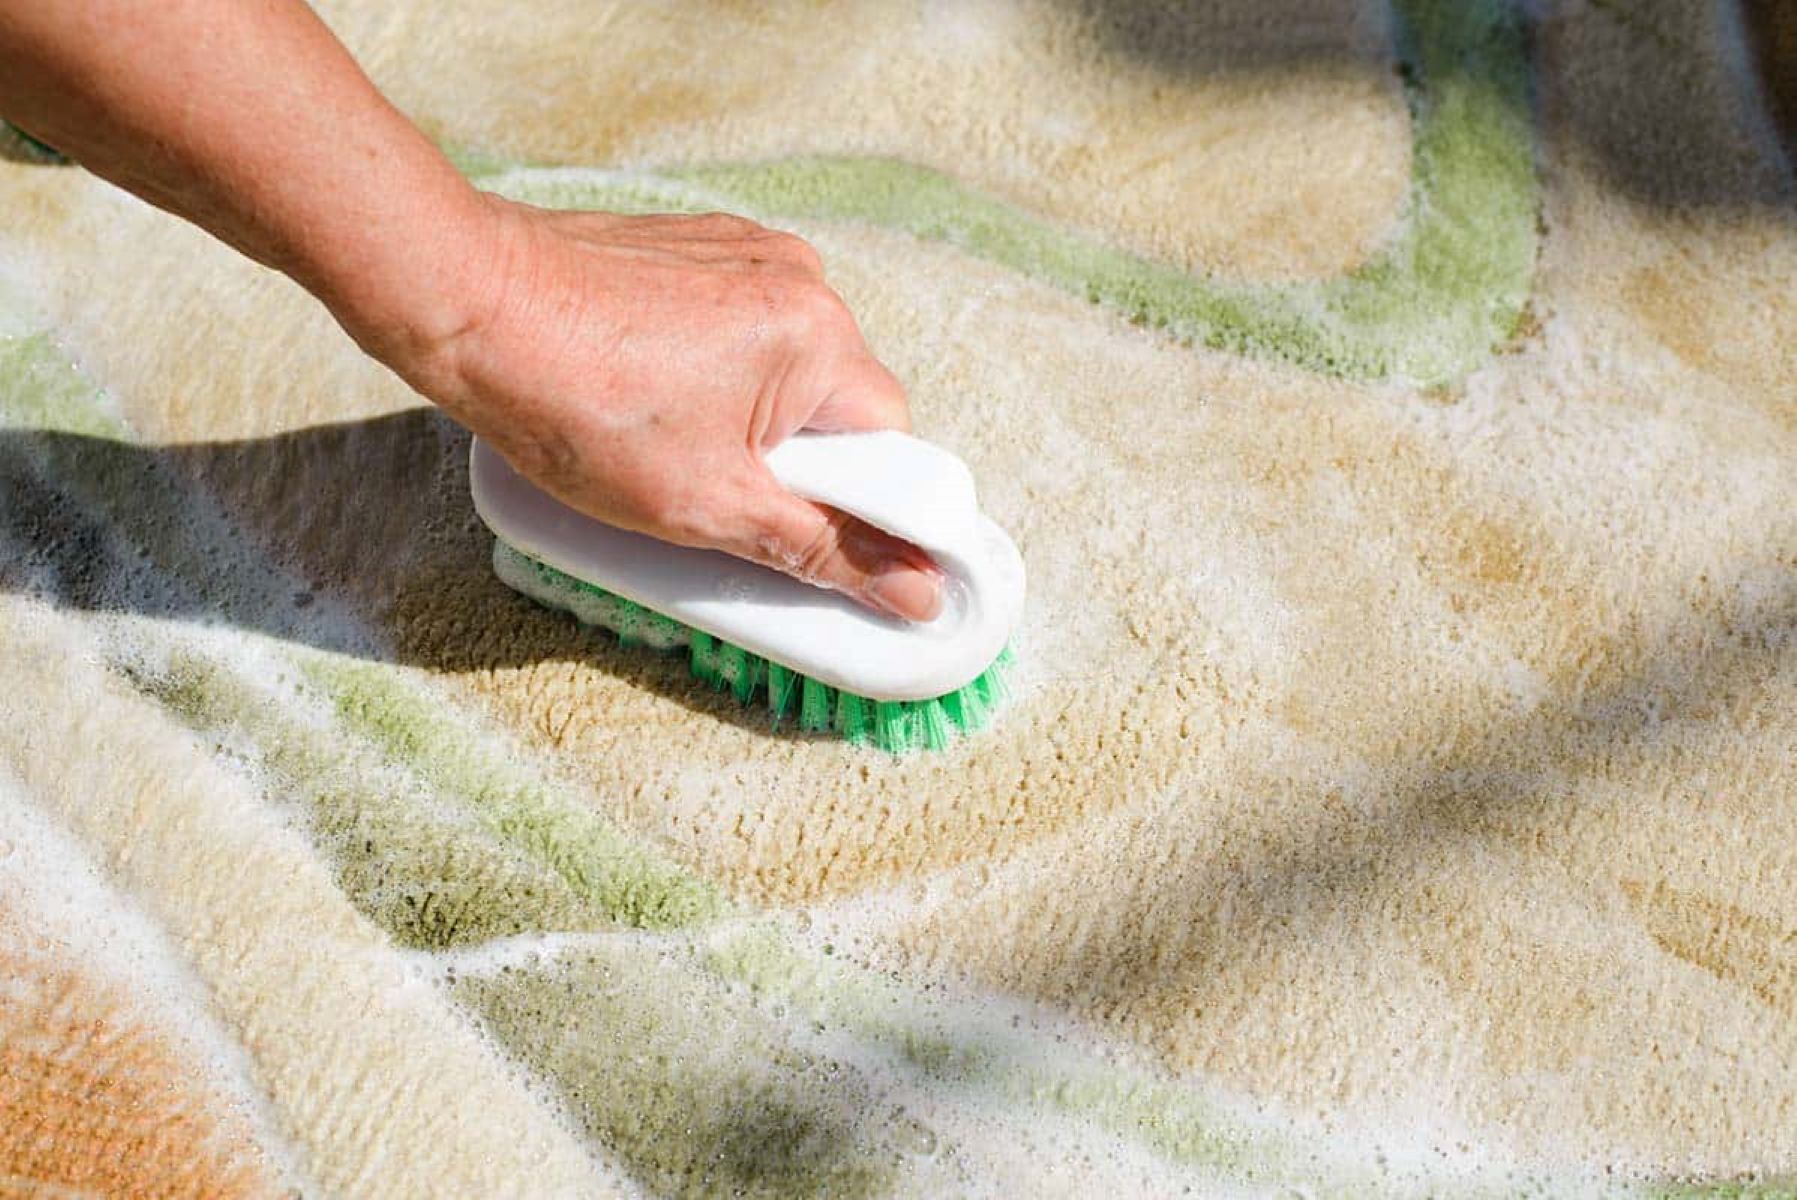 How To Sanitize A Carpet